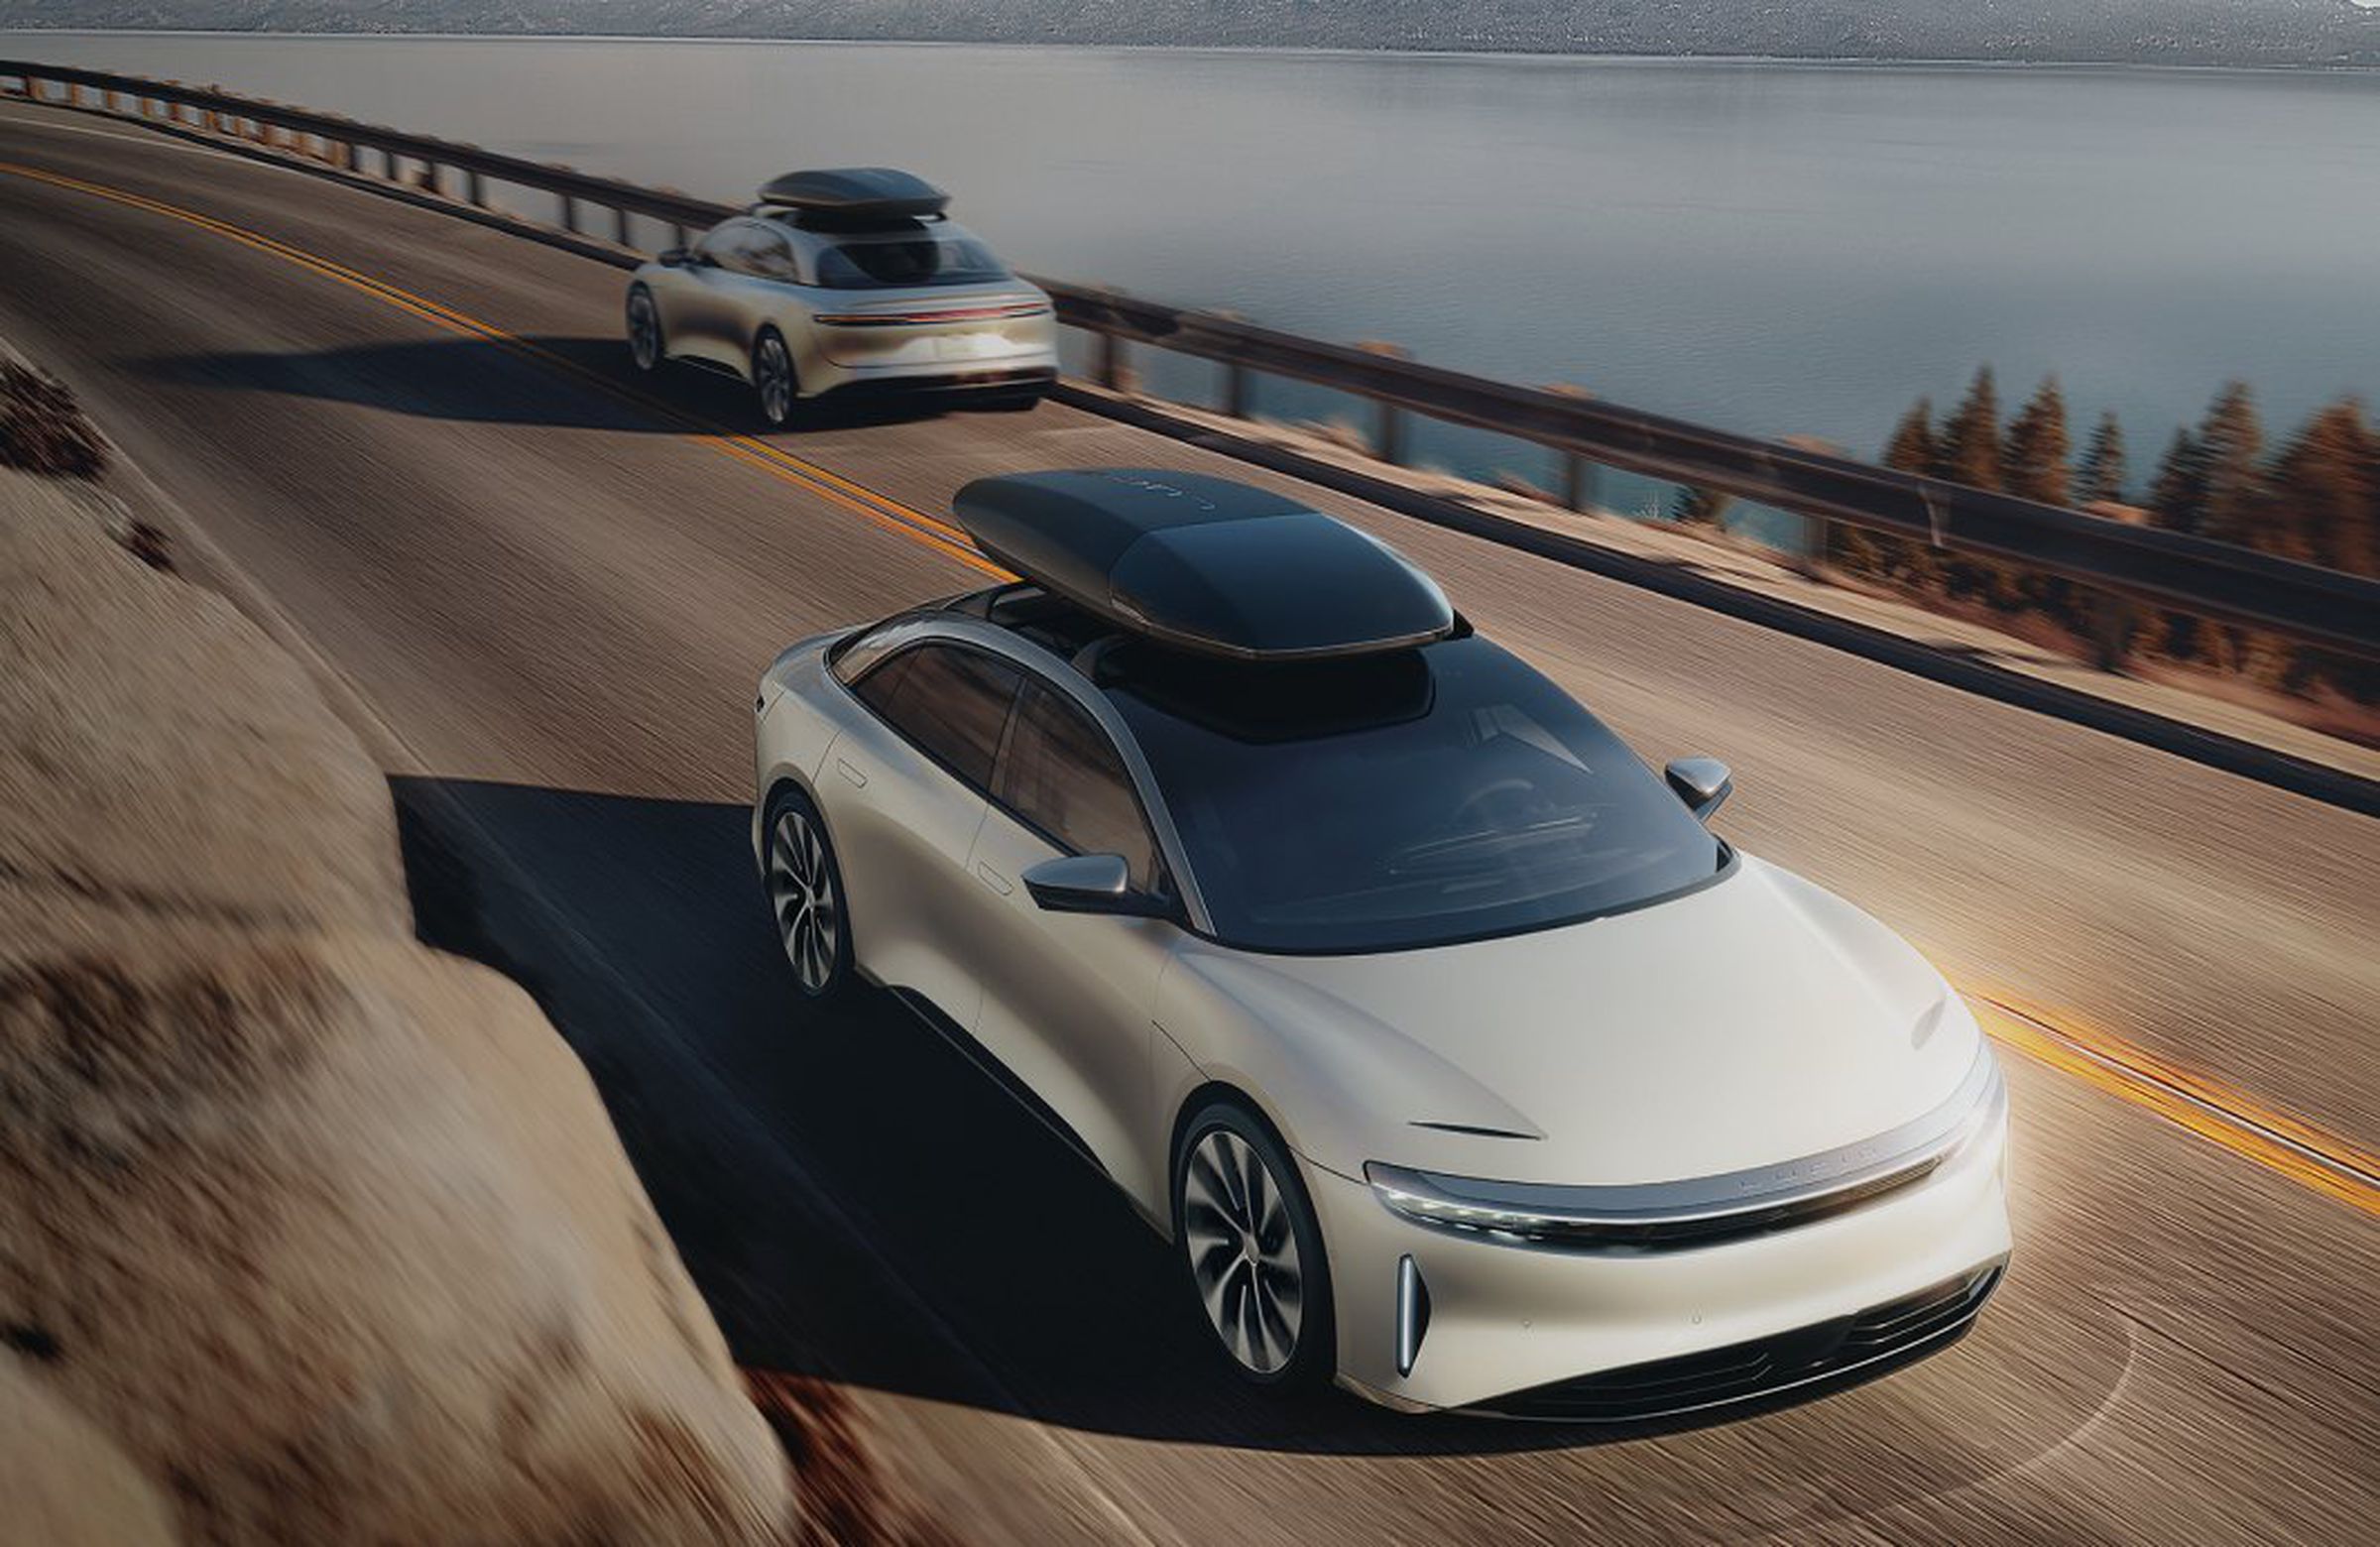 Lucid Air Cargo Capsule roof-mounted storage shown on top of a sedan in a rendered image.